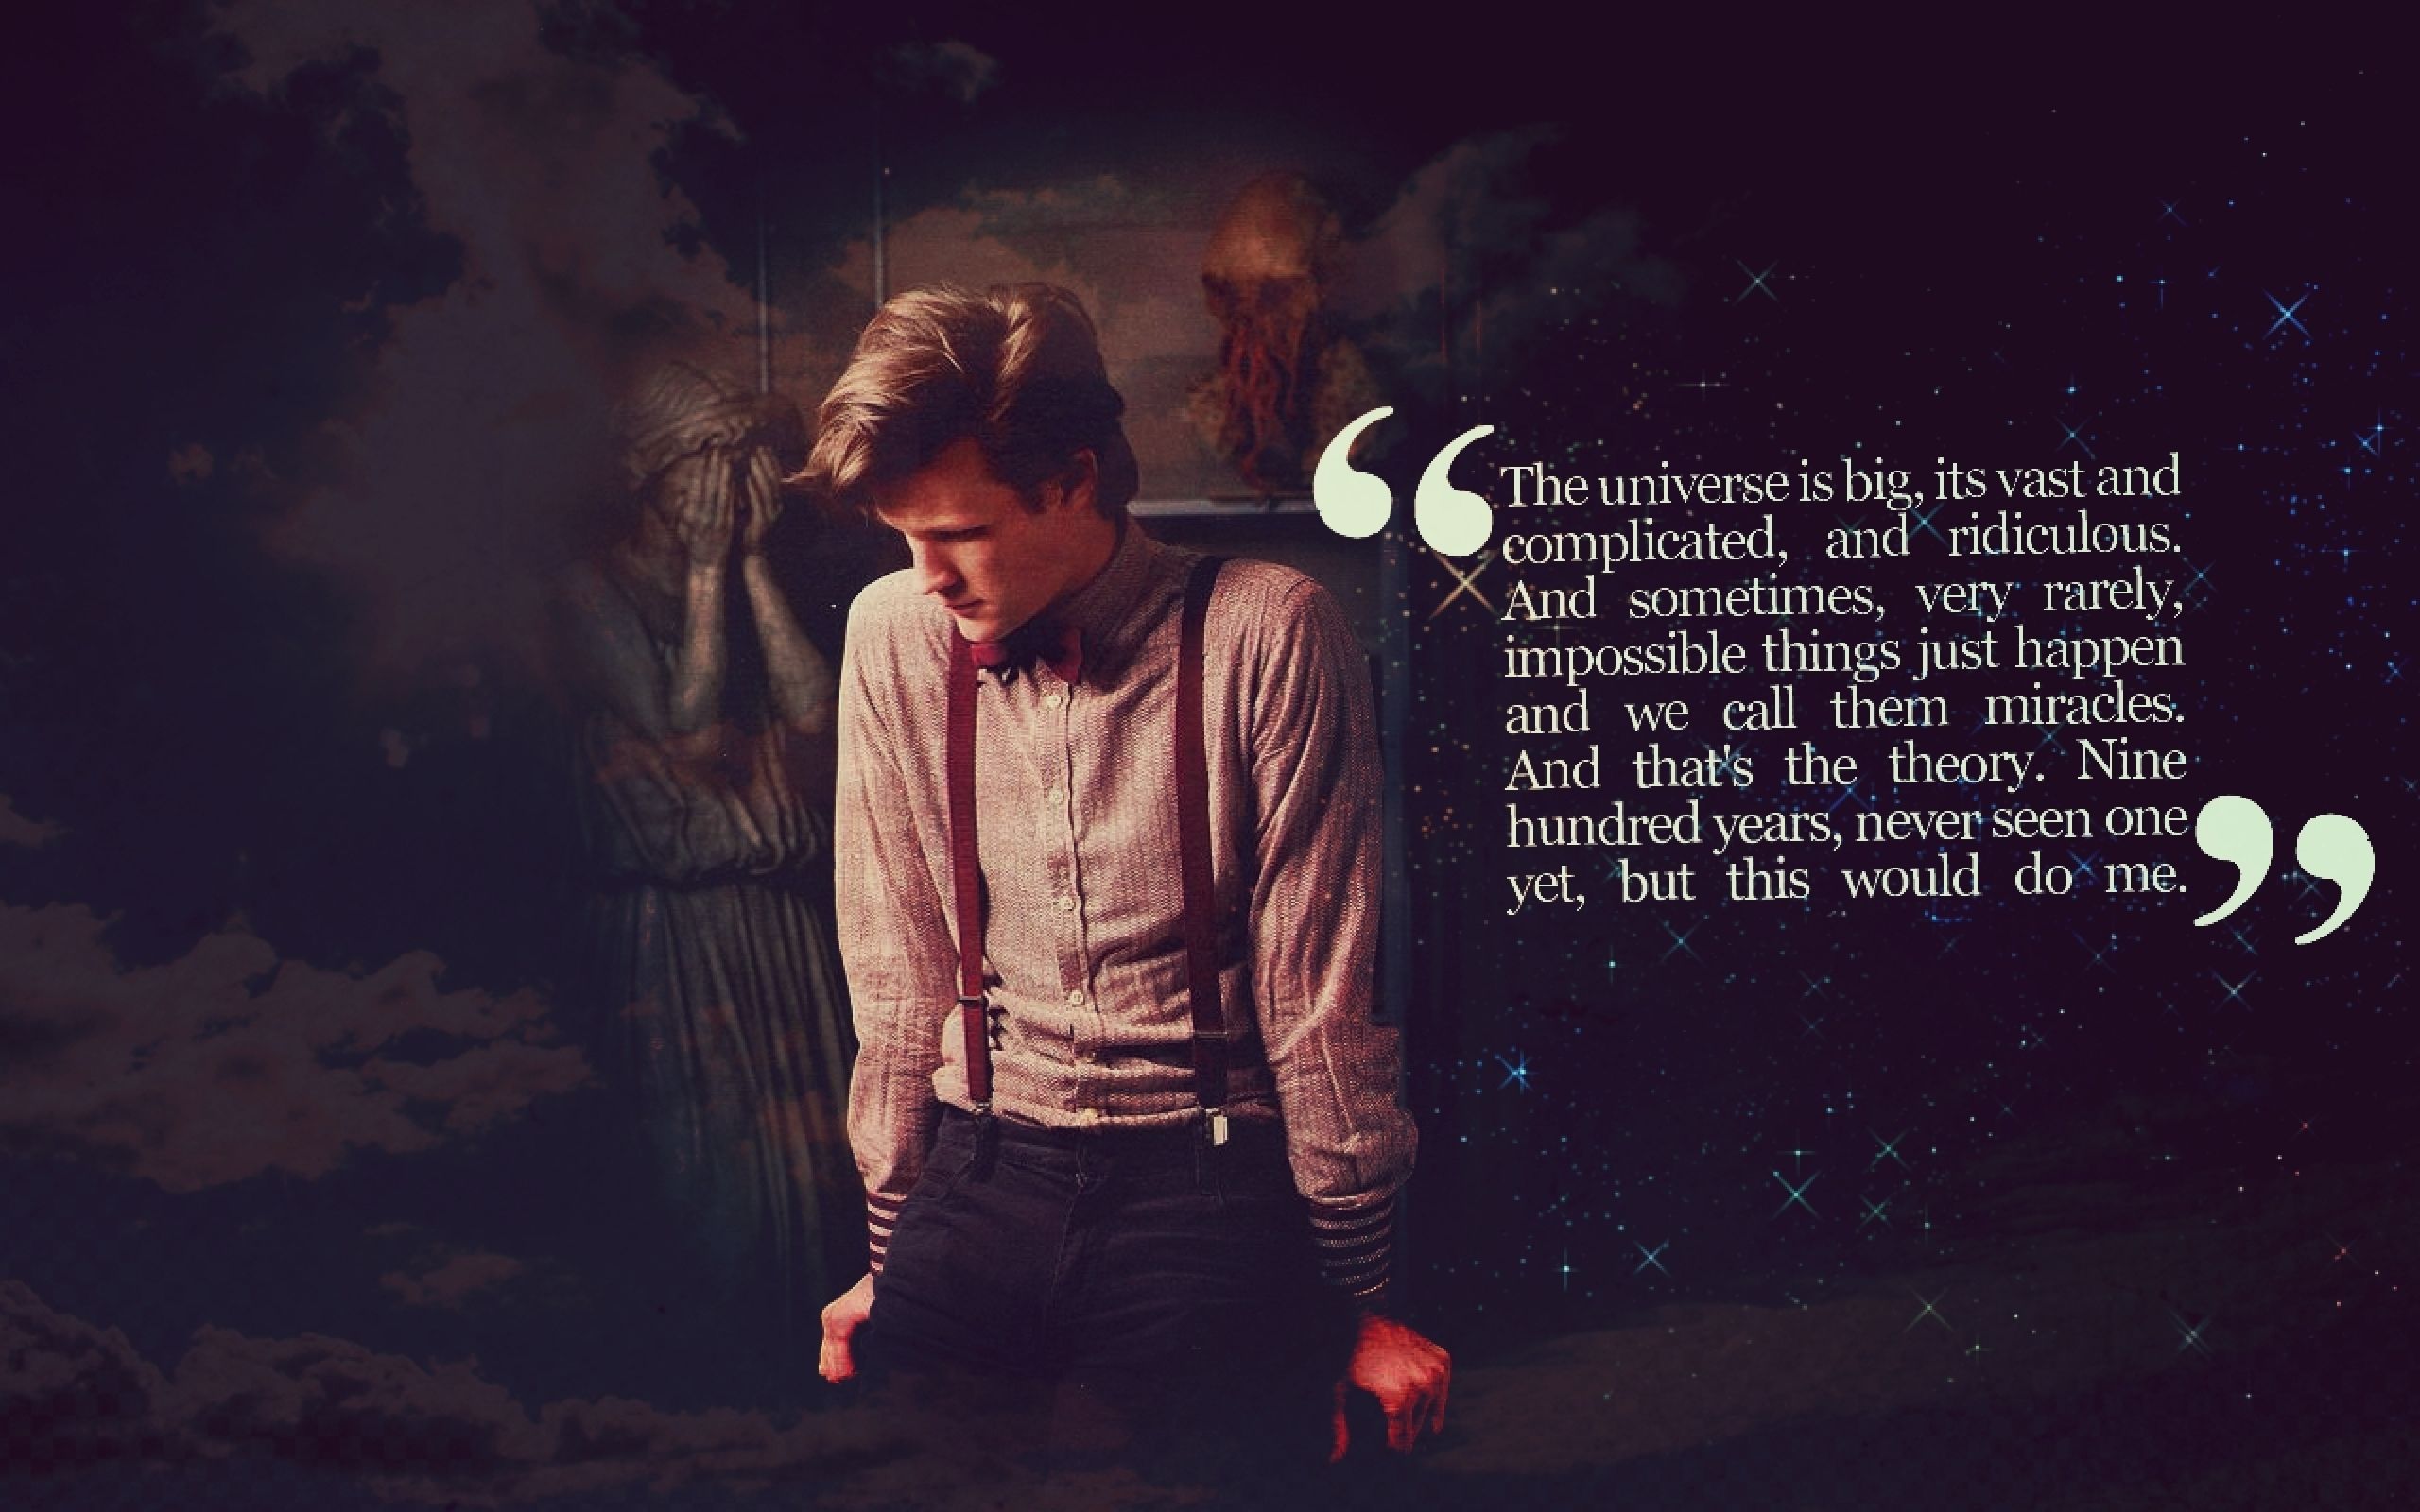 Quotes Matt Smith Eleventh Doctor Doctor Who Weeping Who Matt Smith